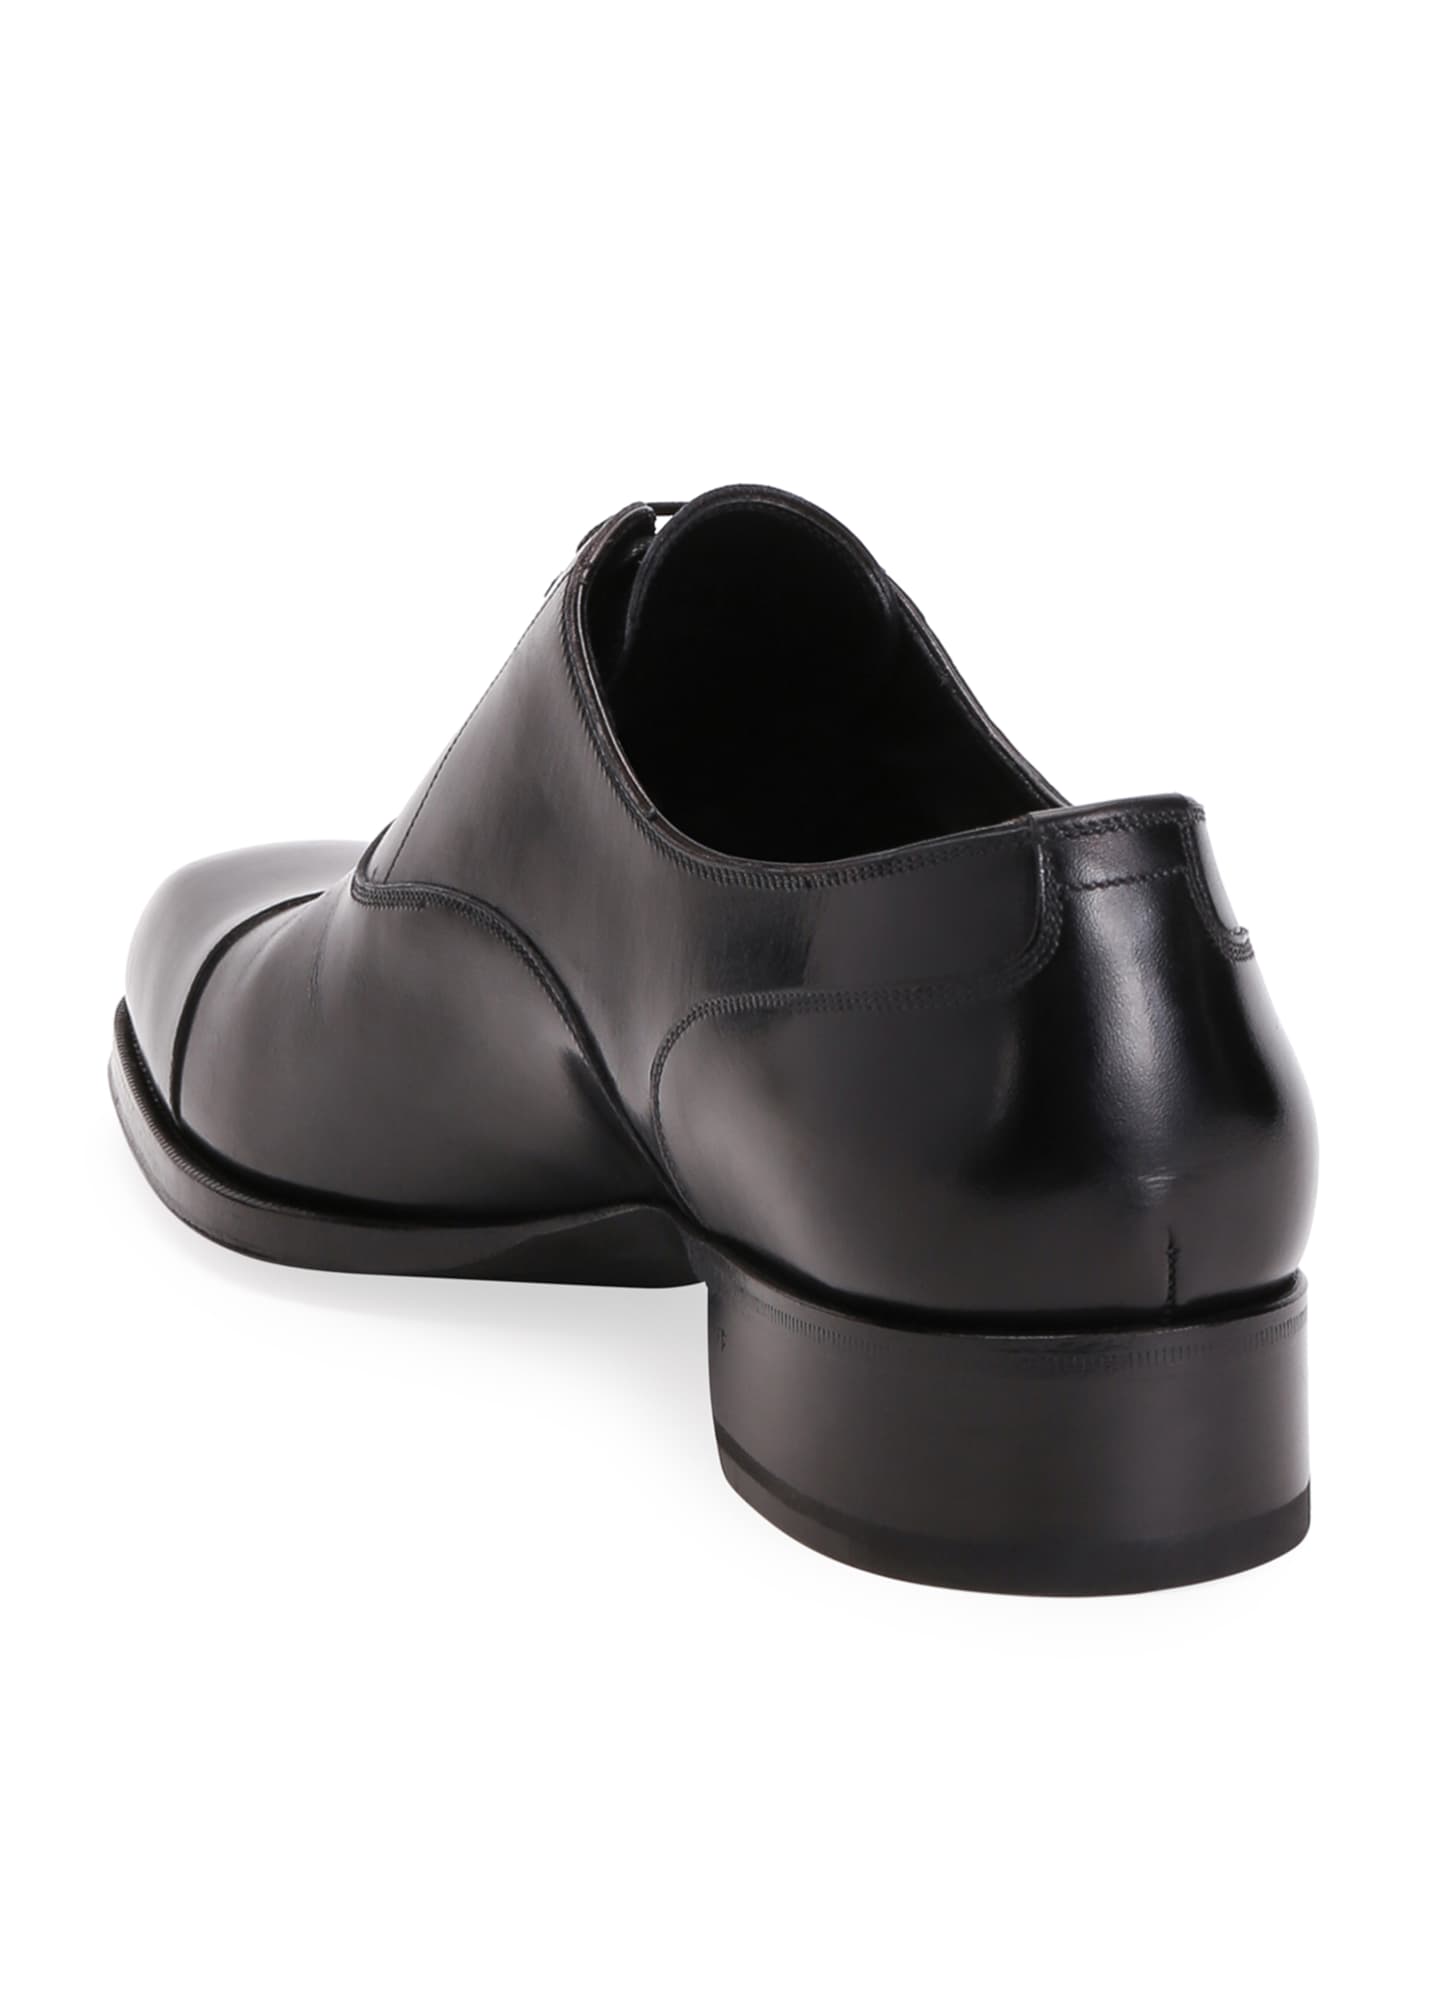 TOM FORD Men's Formal Leather Cap-Toe Oxford Shoes - Bergdorf Goodman